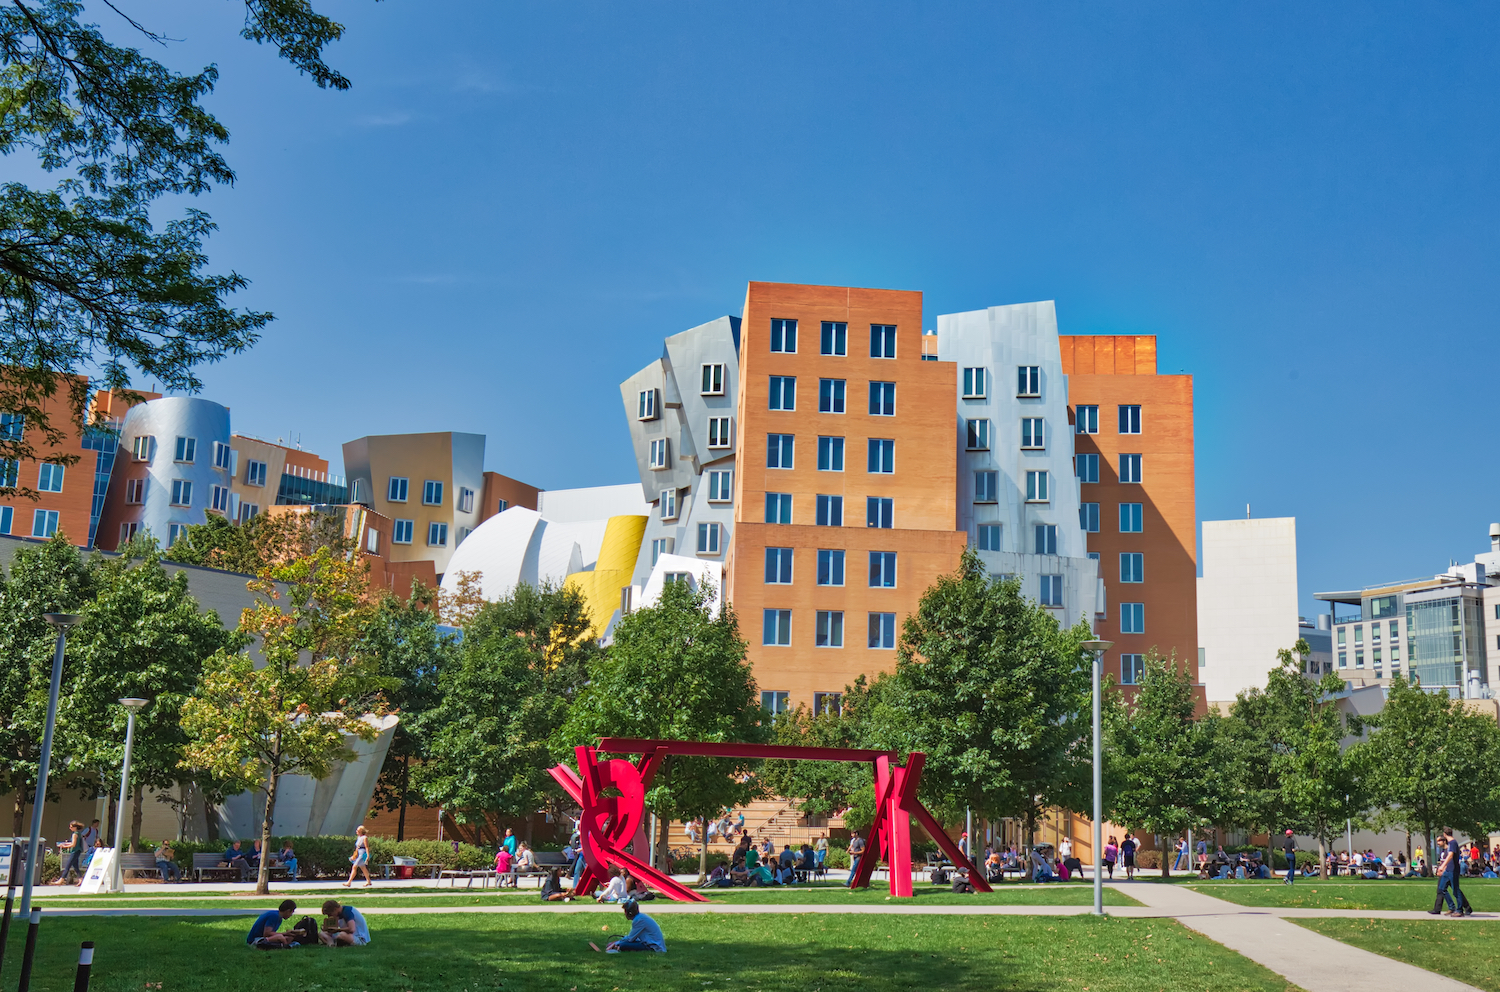 A red metal sculpture is pictured in front of the Stata Center on the MIT campus.